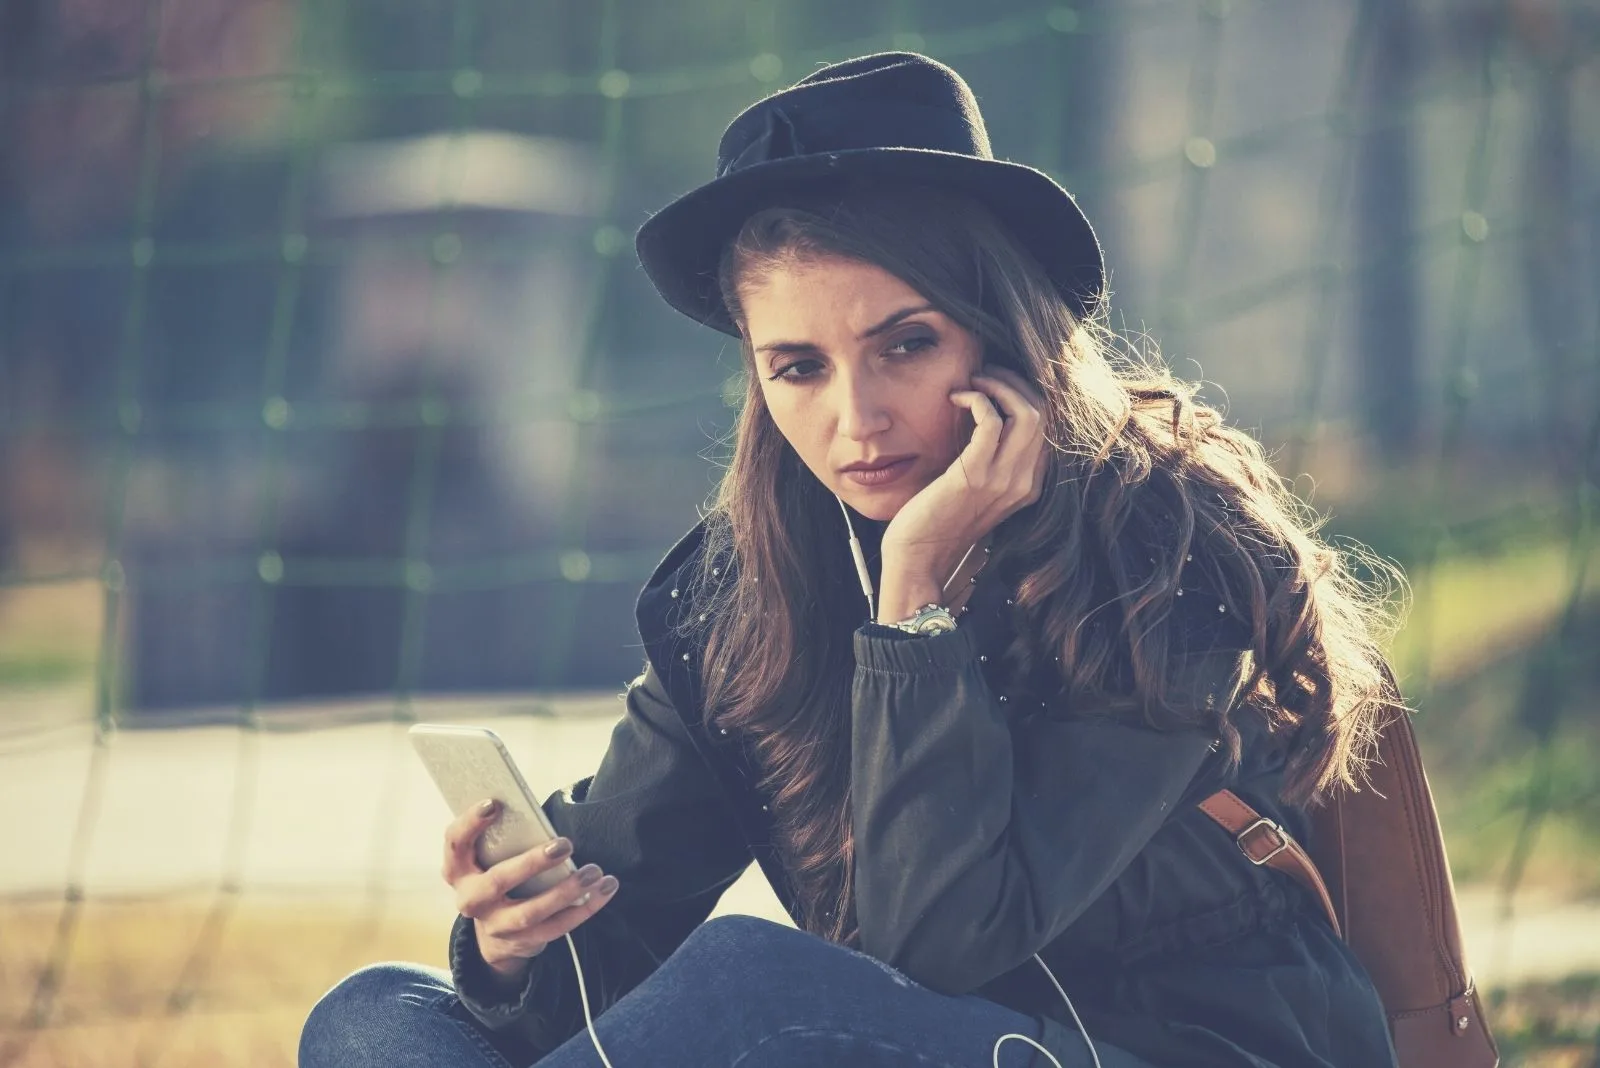 young sad woman with a phone sitting outdoors with a hat